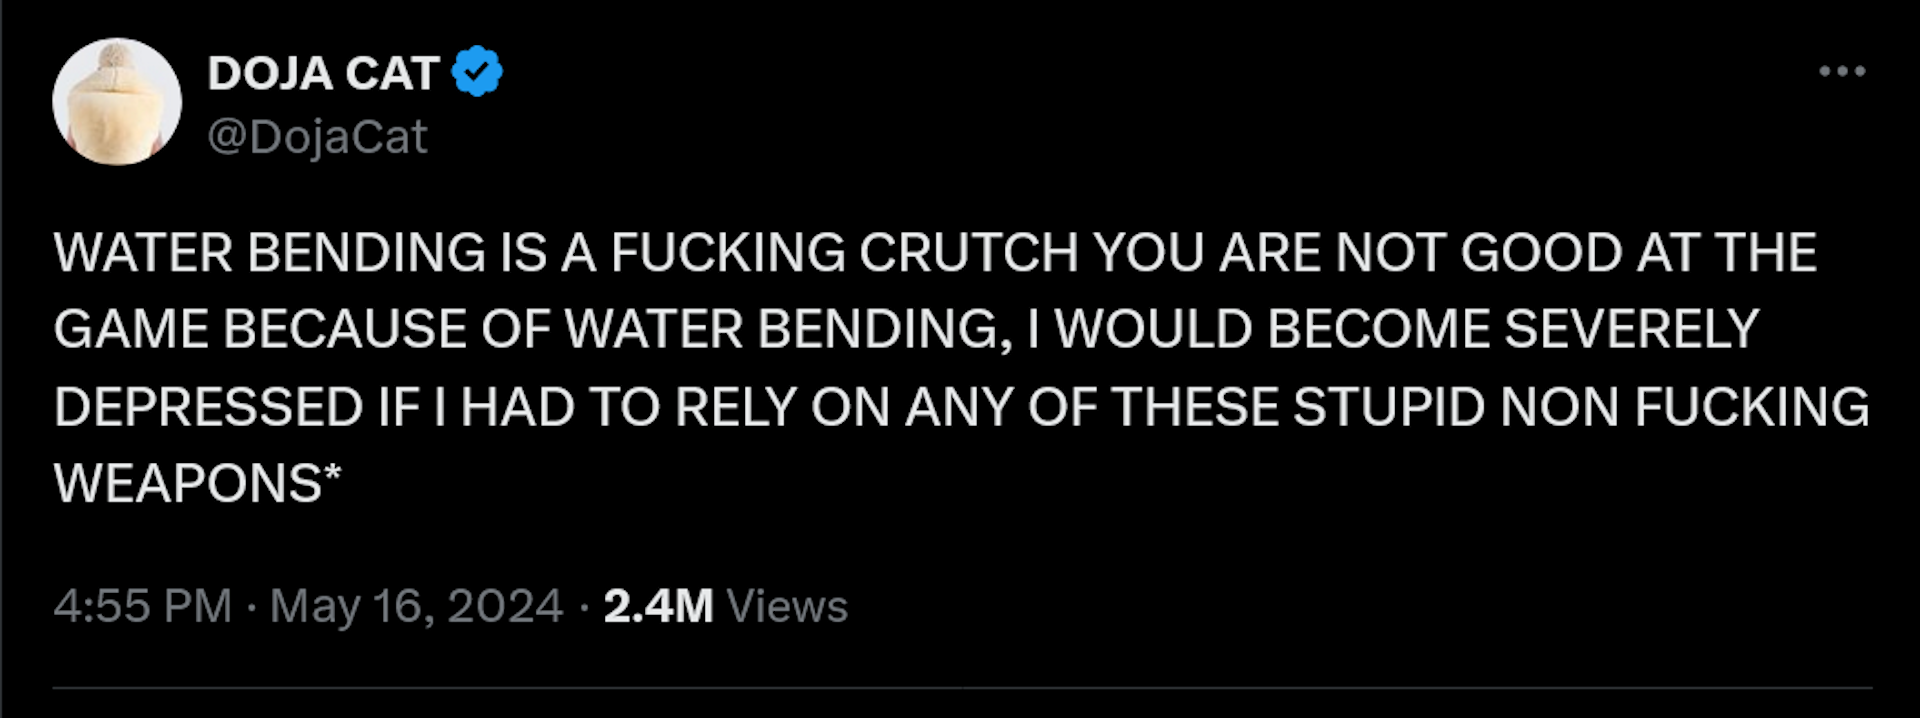 WATER BENDING IS A FUCKING CRUtch YOU'RE NOT GOOD AT THE GAME BECAUSE OF WATER BENDING I WOULD BE VERY DEPRESSED IF I HAD TO RELY ON ANY OF THESE STUPID NON FUCKING WEAPONS*